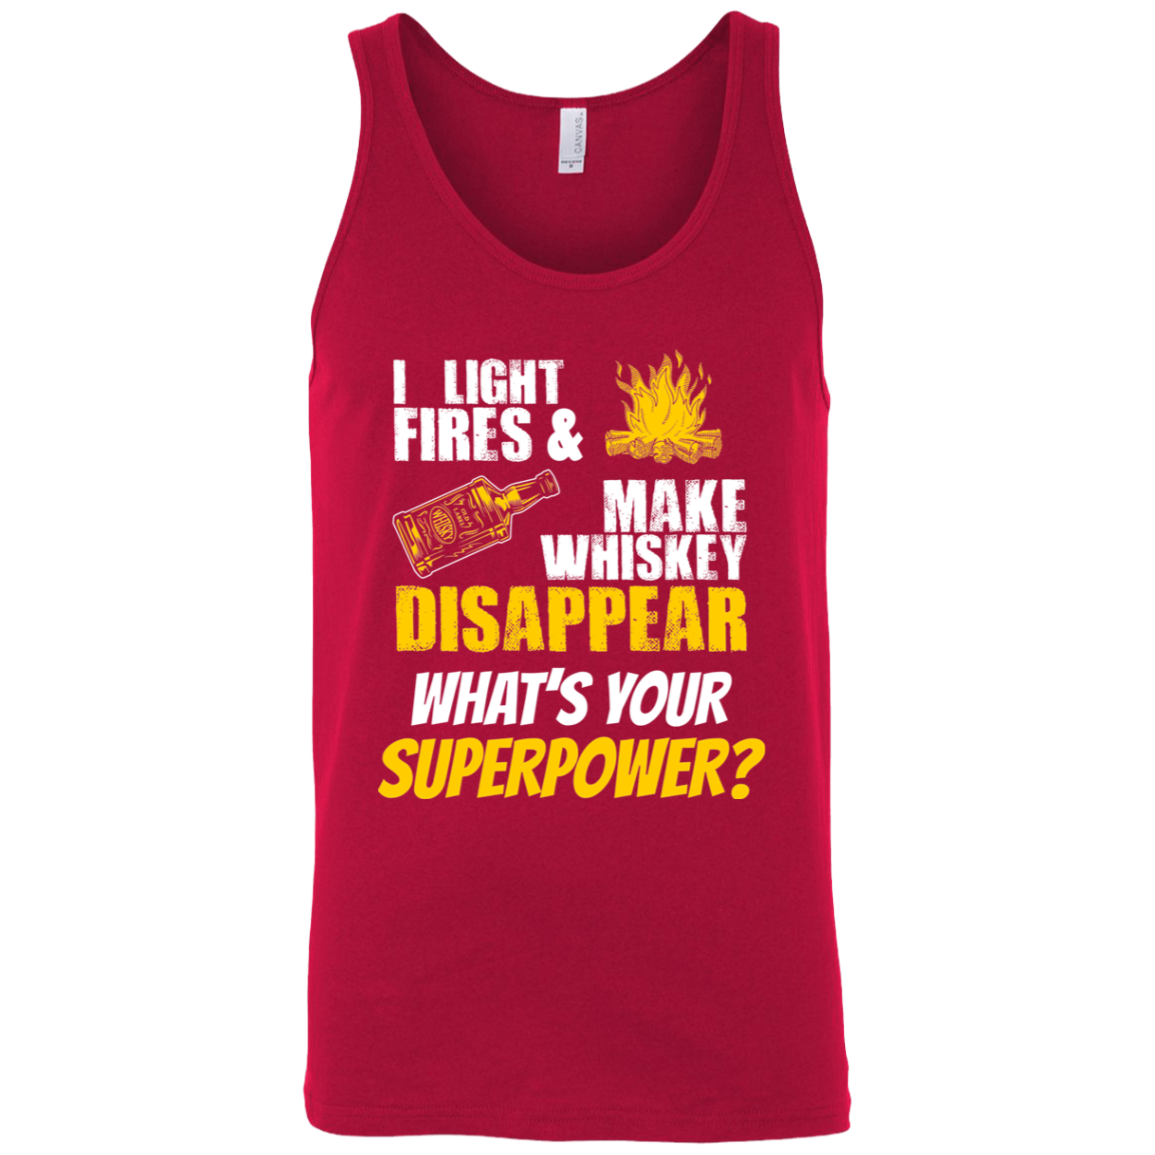 I Light Fires And Make Whiskey Disappear What's Your Superpower? Tank Top Apparel - The Beer Lodge